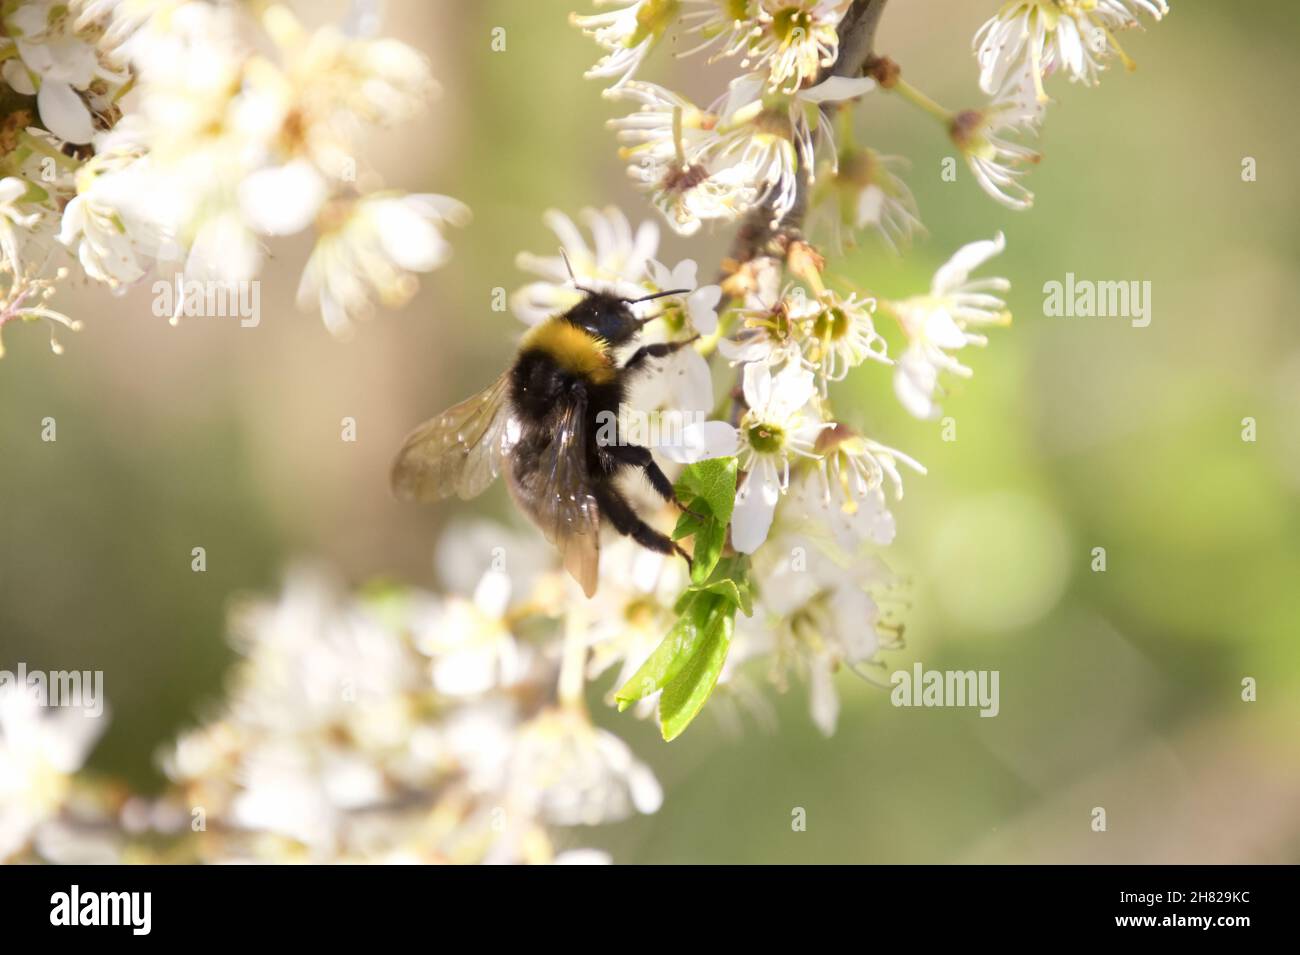 Bumblebee (possible Bombus sylvestris - Forest Cuckoo Bee) feeding on a white flower, Lake District, UK Stock Photo